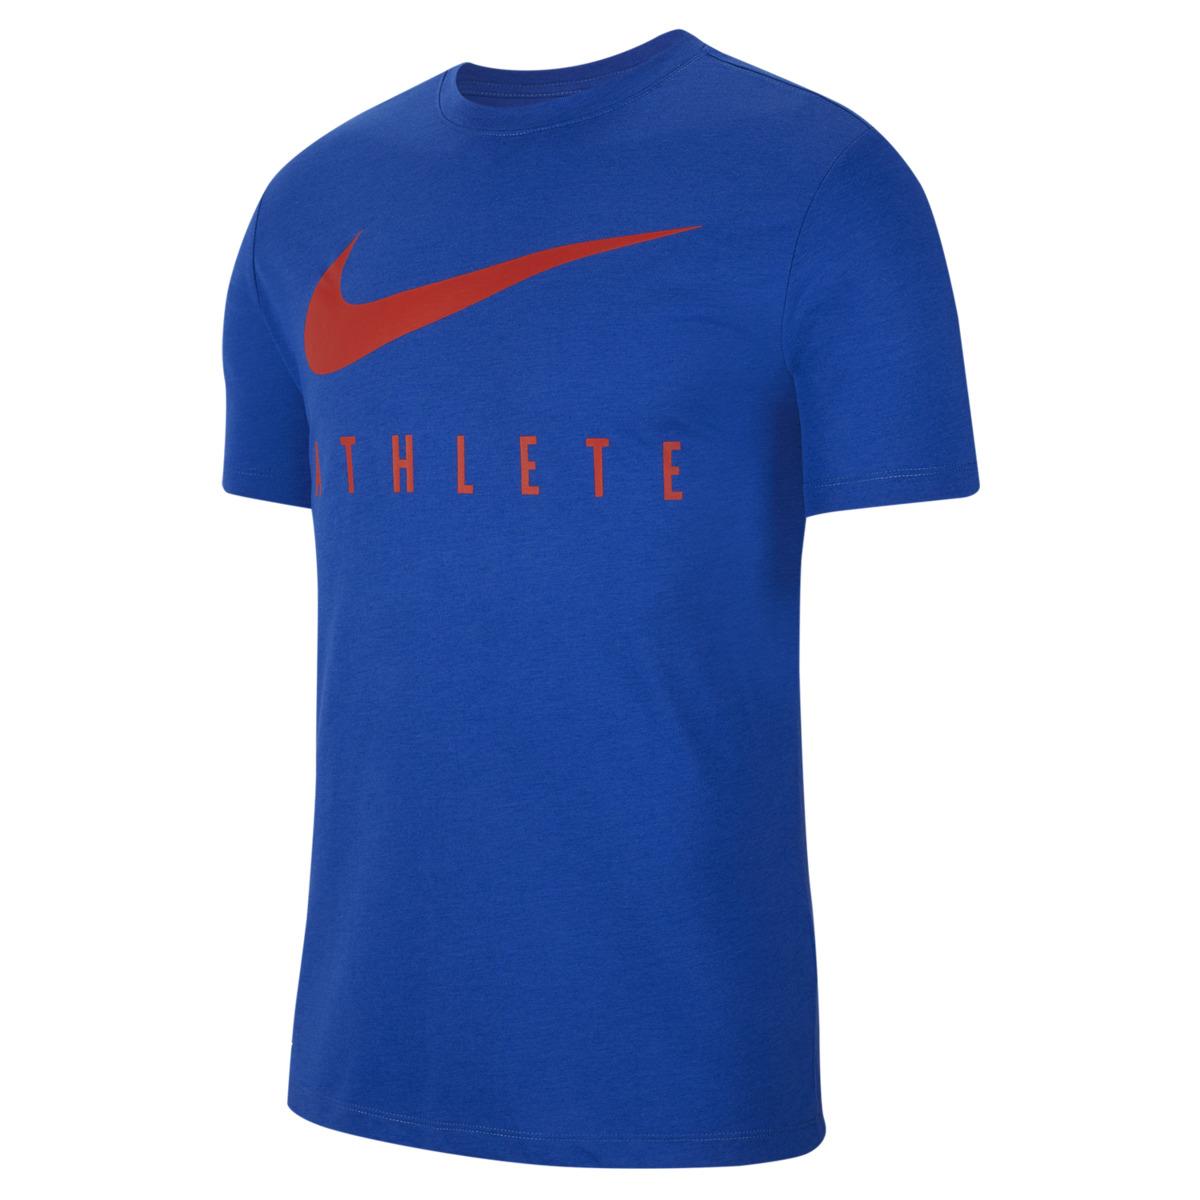 Nike Synthetic Dri-fit T-shirt in Blue for Men - Lyst